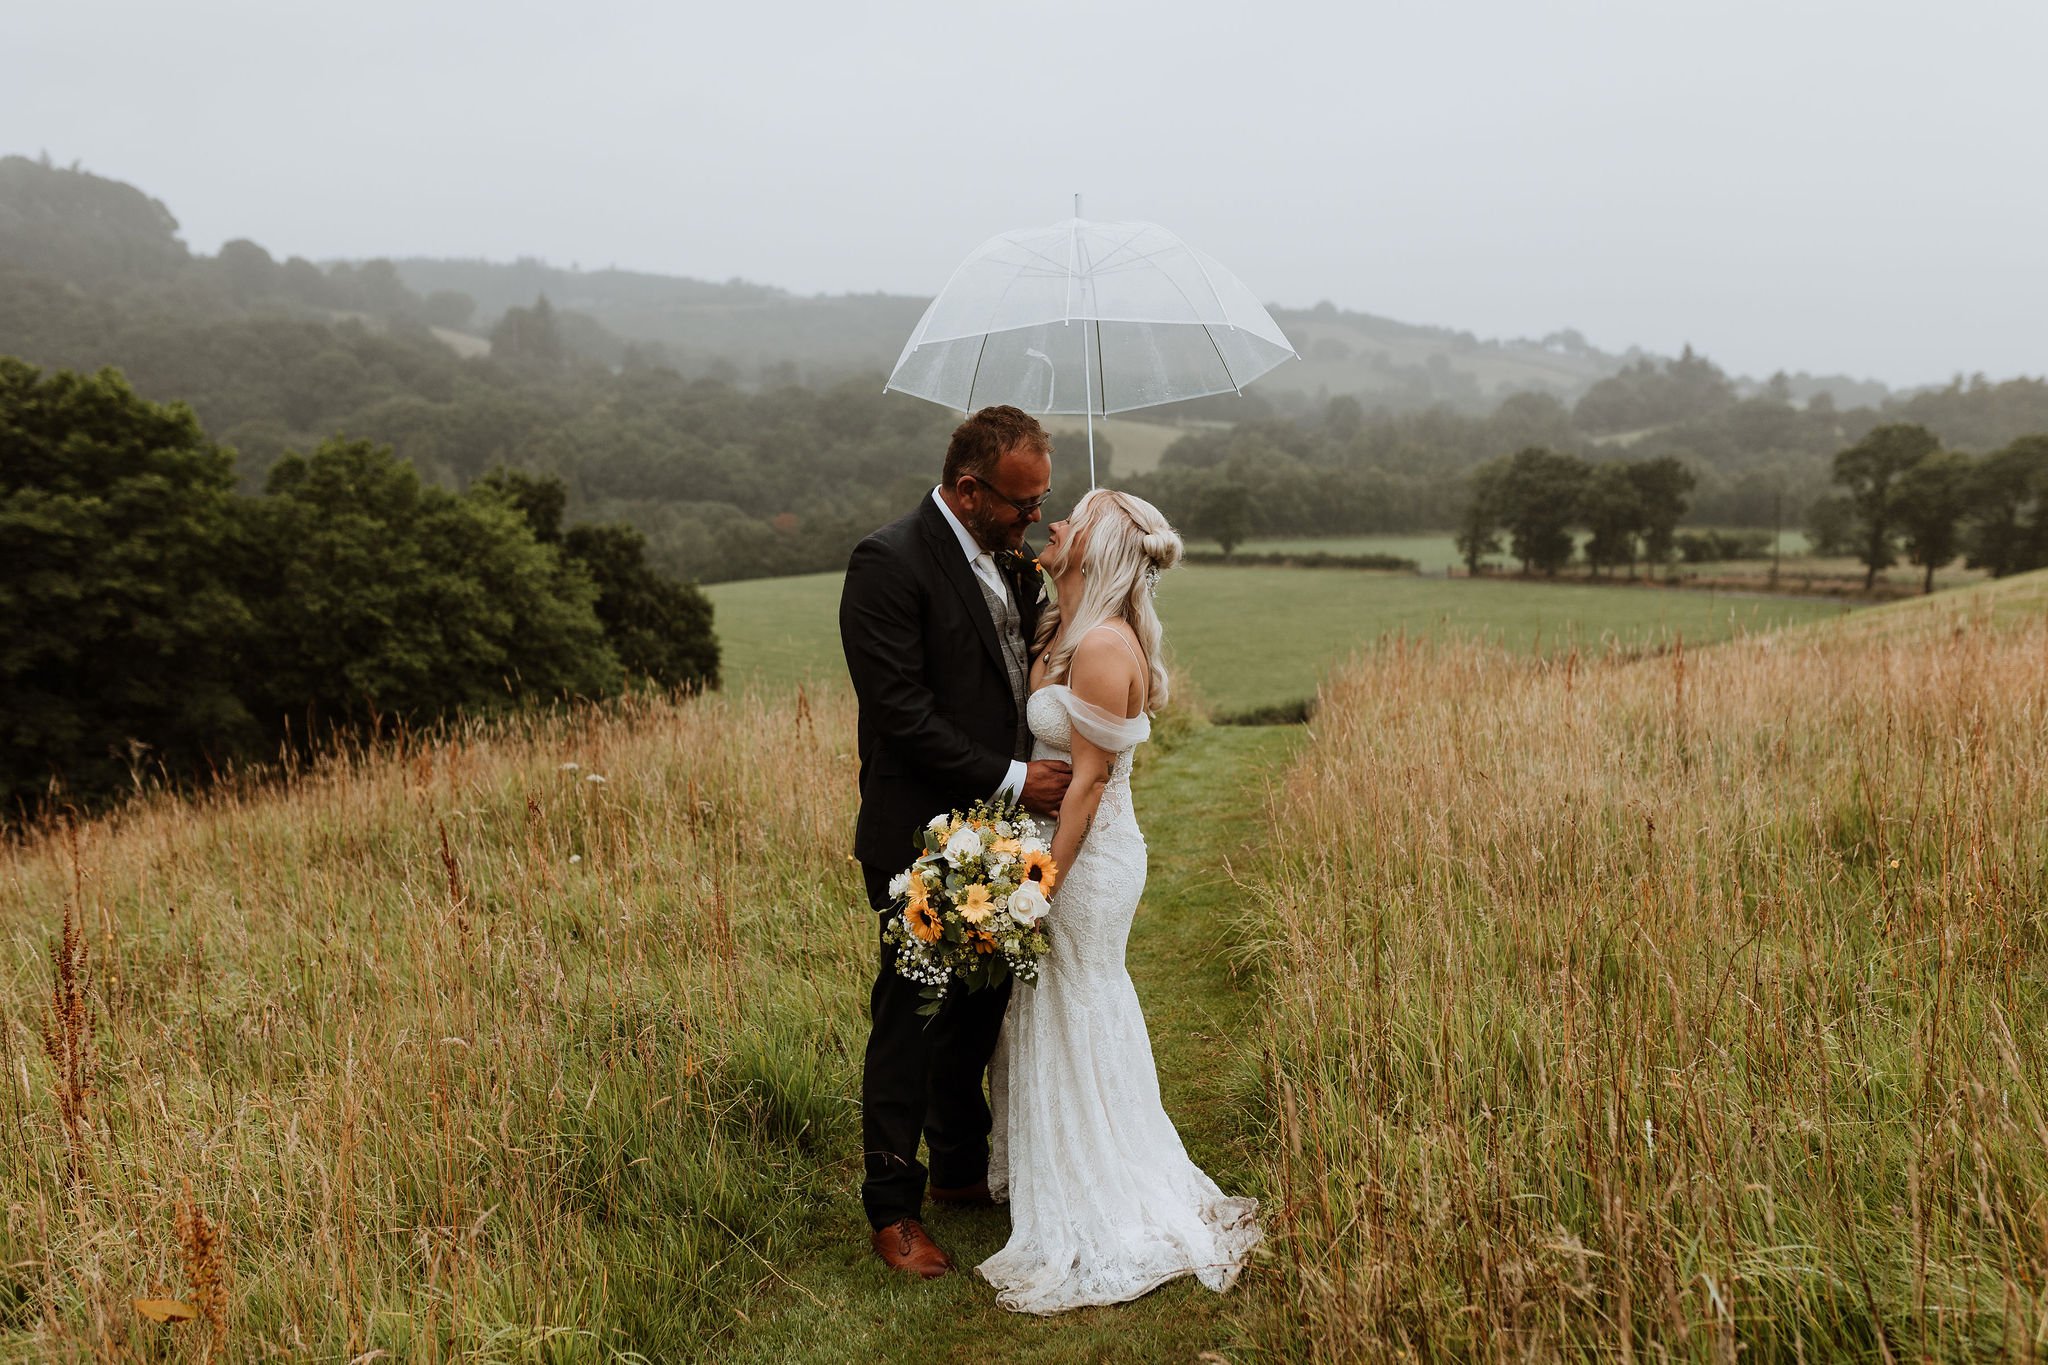  Stood on a mowed path of grass, surrounded by fields and trees the bride and groom are stood gazing into each others eyes under a clear umbrella which they are holding up over themselves.   The groom is wearing a dark suit with a checked waistcoat a